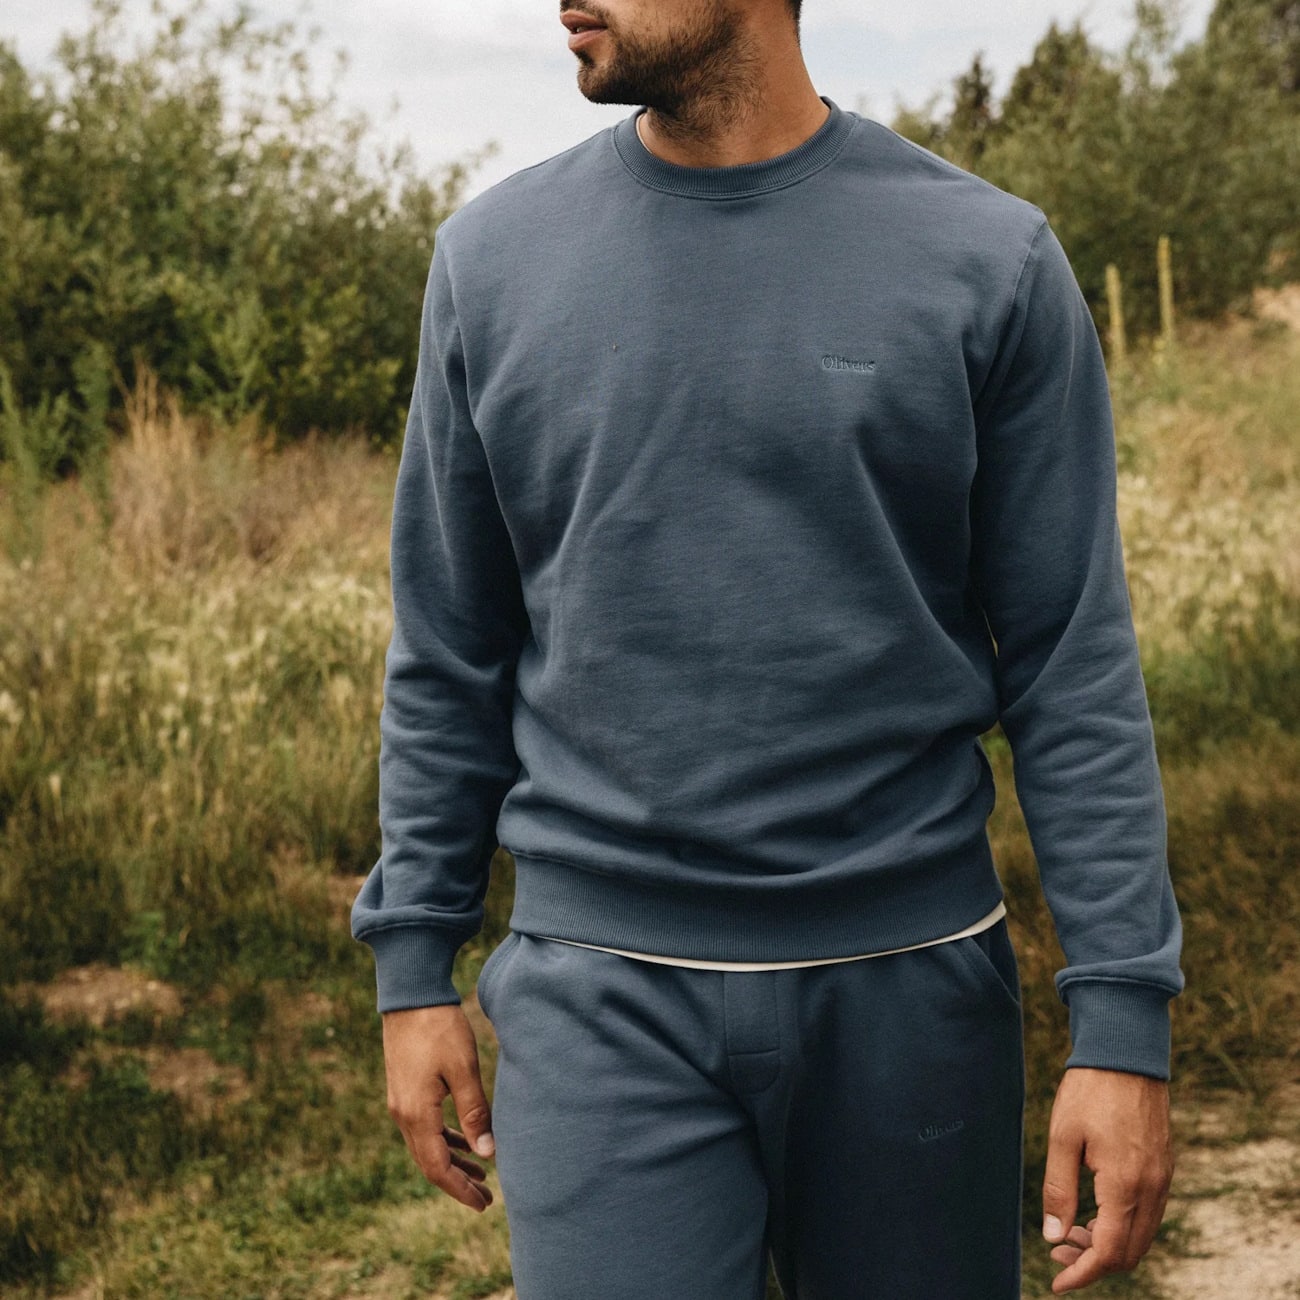 Canadian Loungewear Brands To Explore